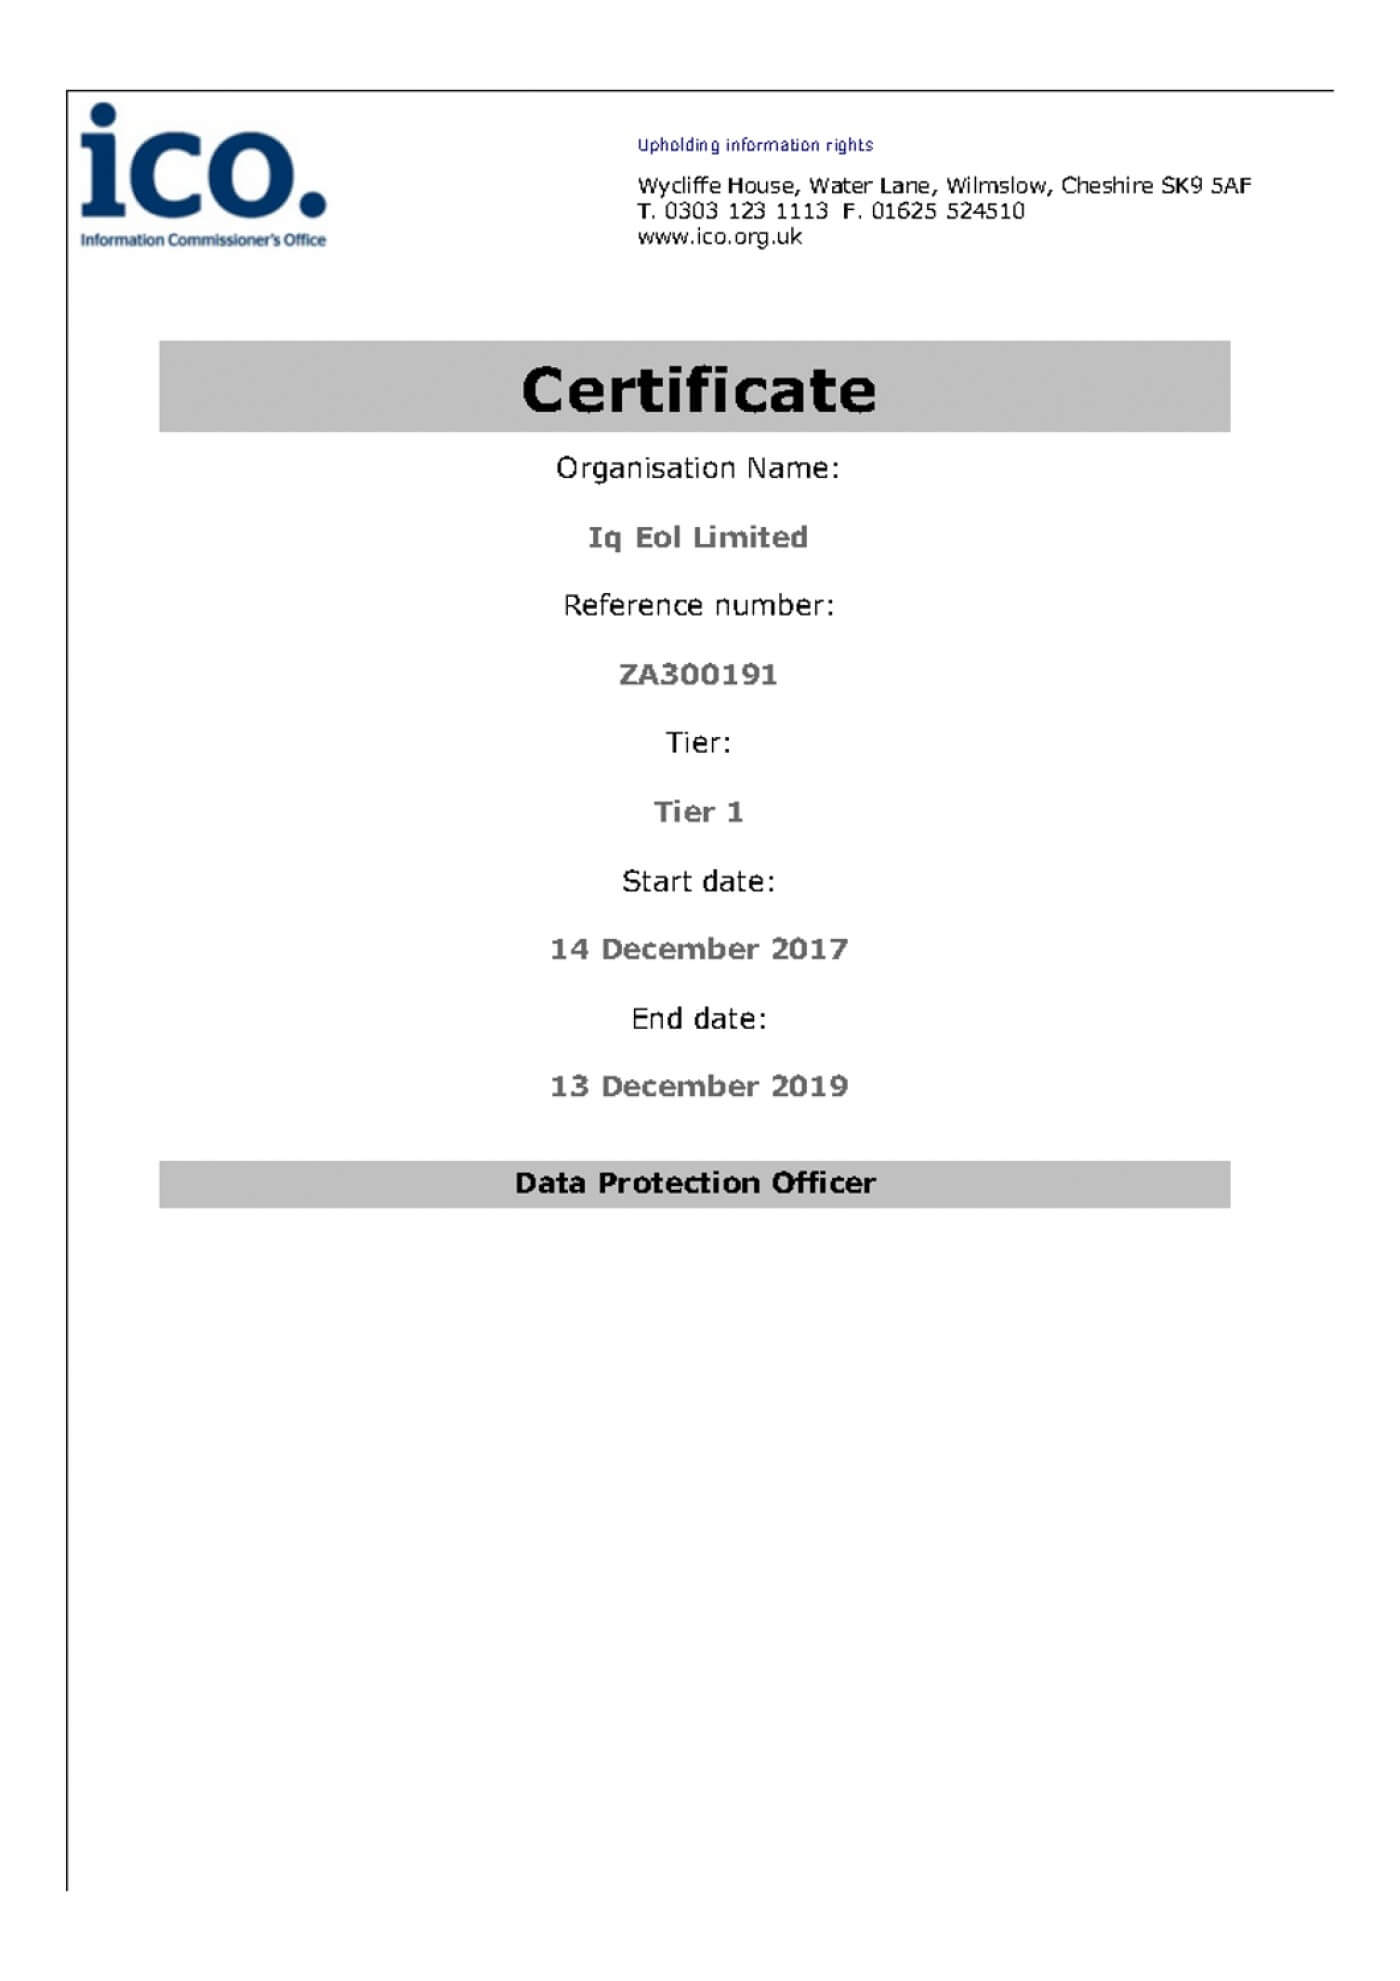 038 Certificate Of Destruction Template Ico Exceptional With Regard To Iq Certificate Template